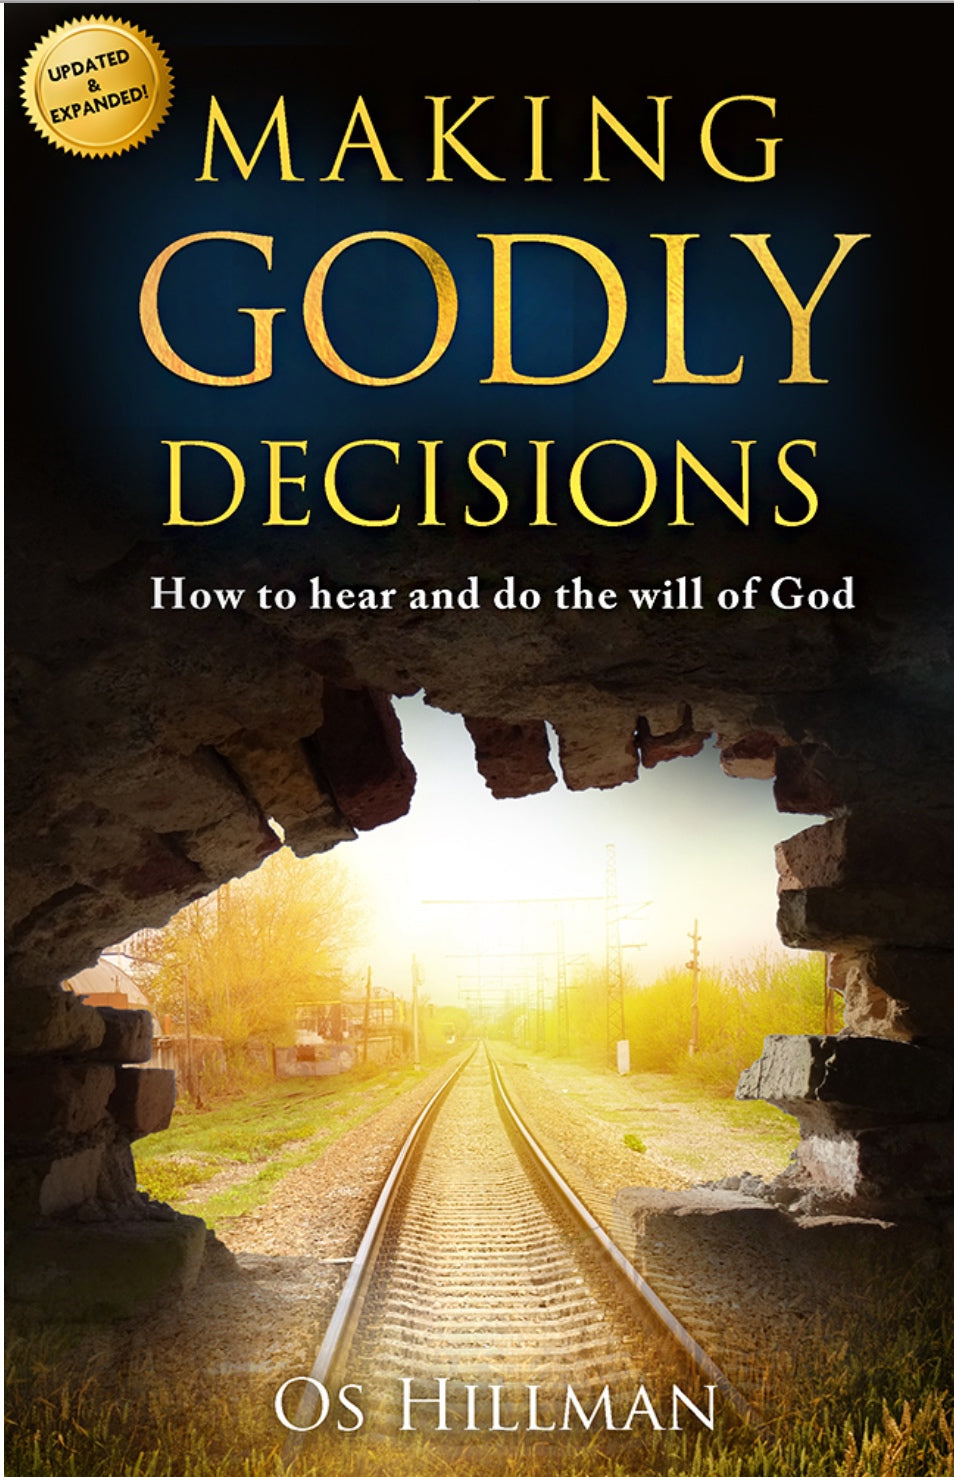 Making Godly Decisions: How To Hear And Do The Will Of God